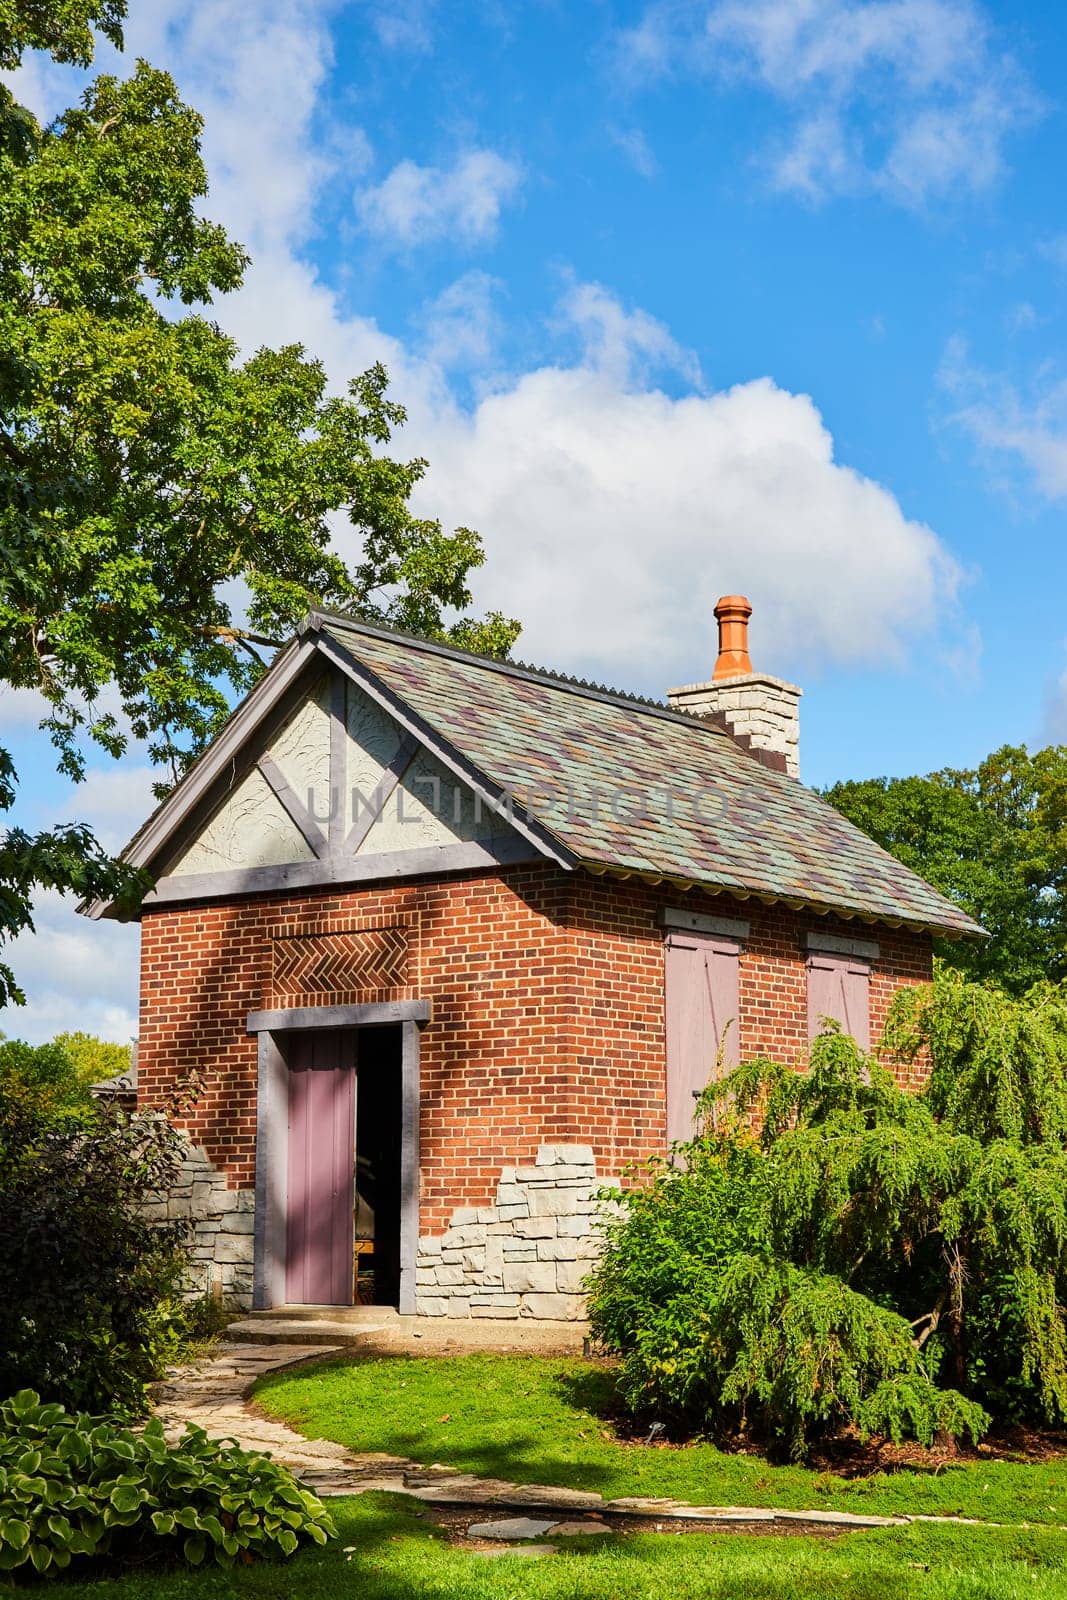 Charming Red Brick Outbuilding with Slate Roof and Green Surroundings by njproductions